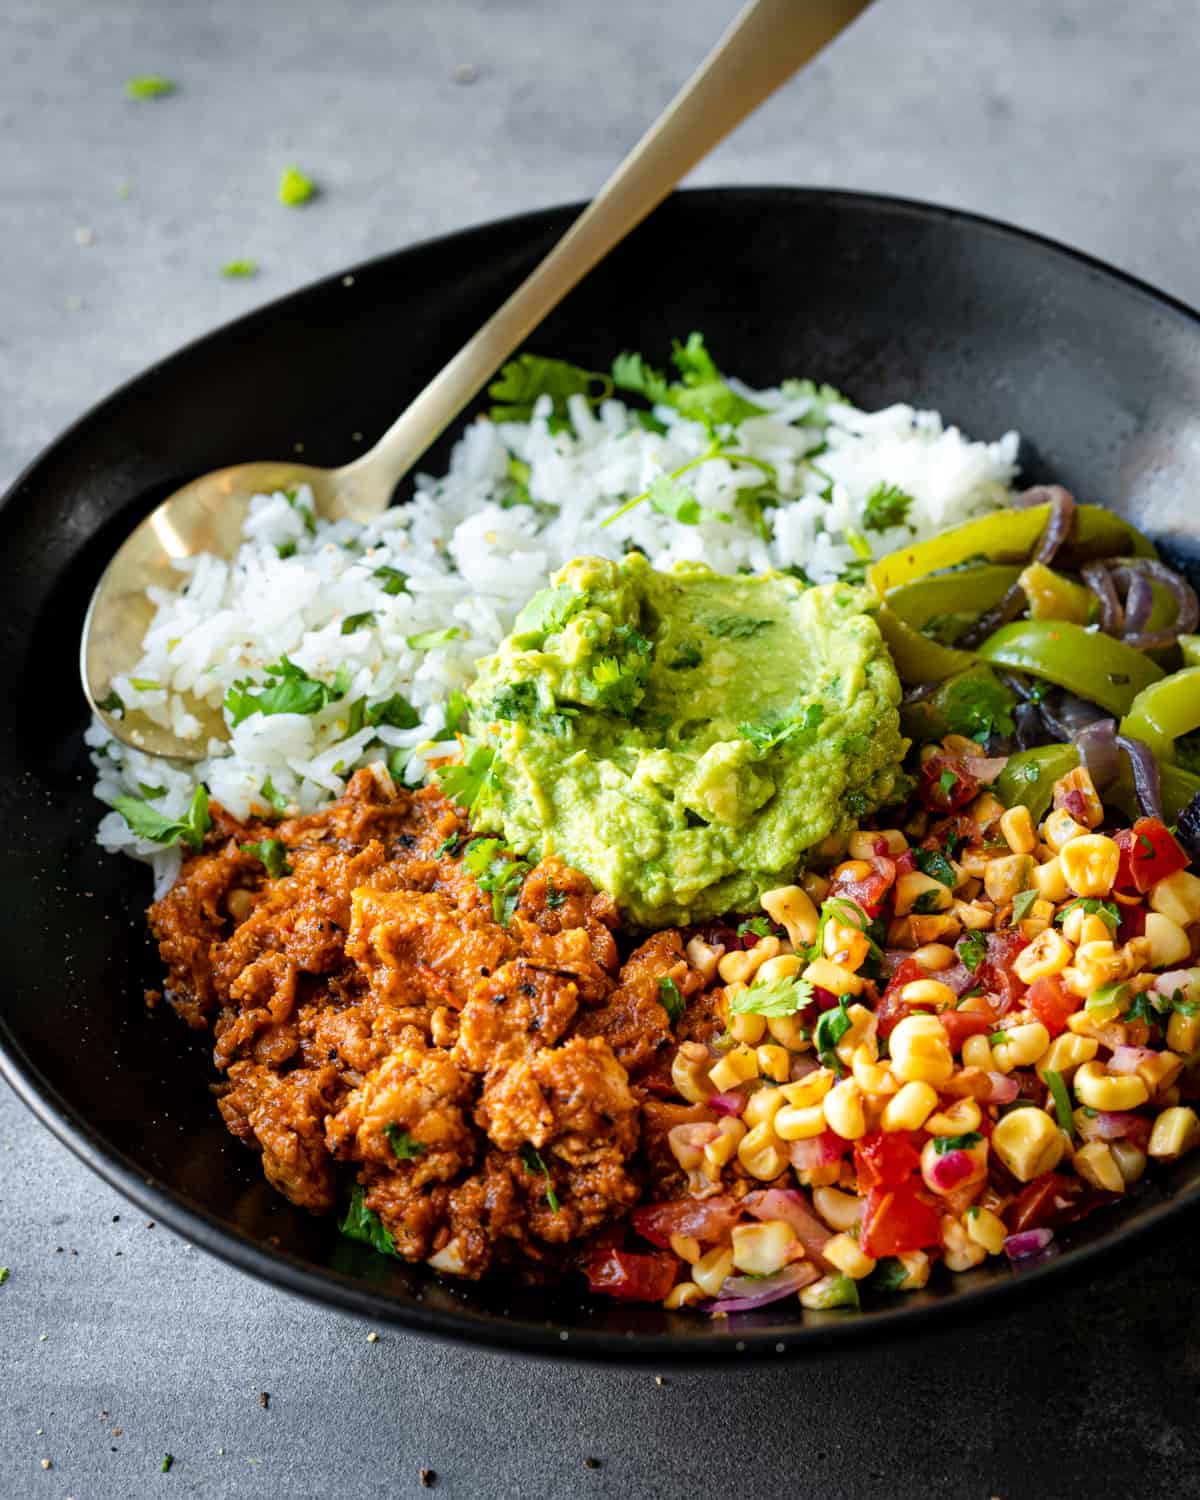 Vegan burrito bowl with sofritas, corn salsa, guacamole, and rice in a black ceramic bowl with spoon. 